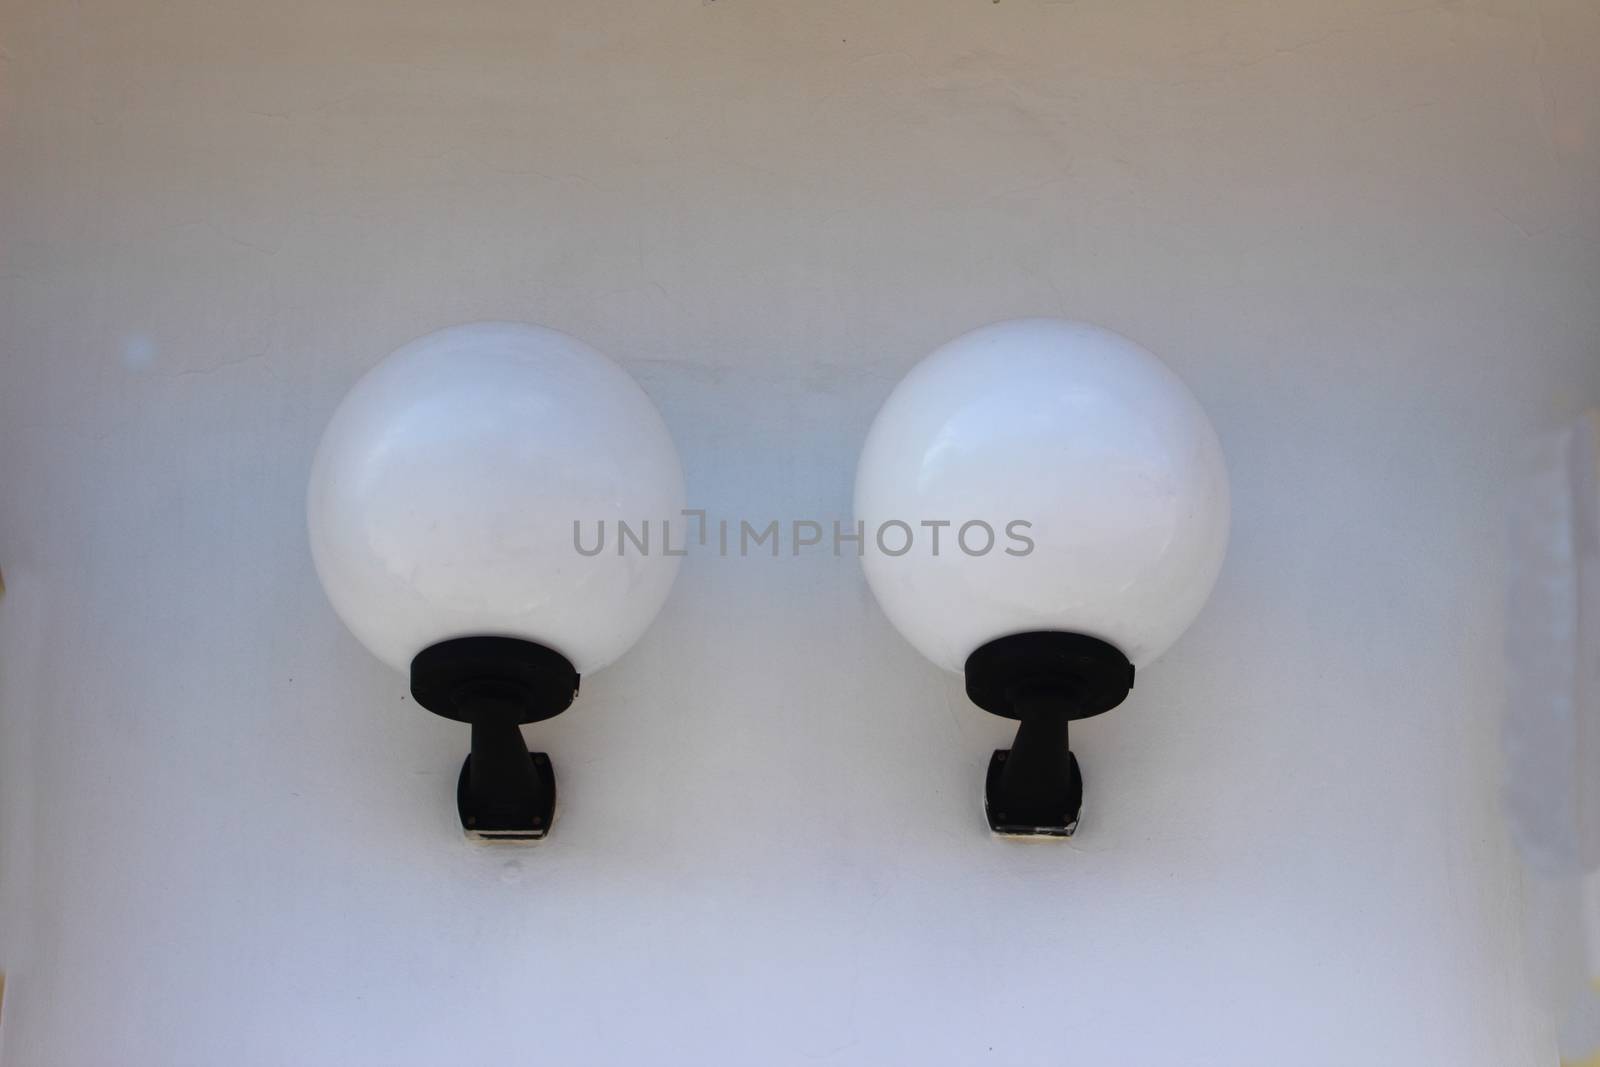 On two wall light decorative lamp shades with round